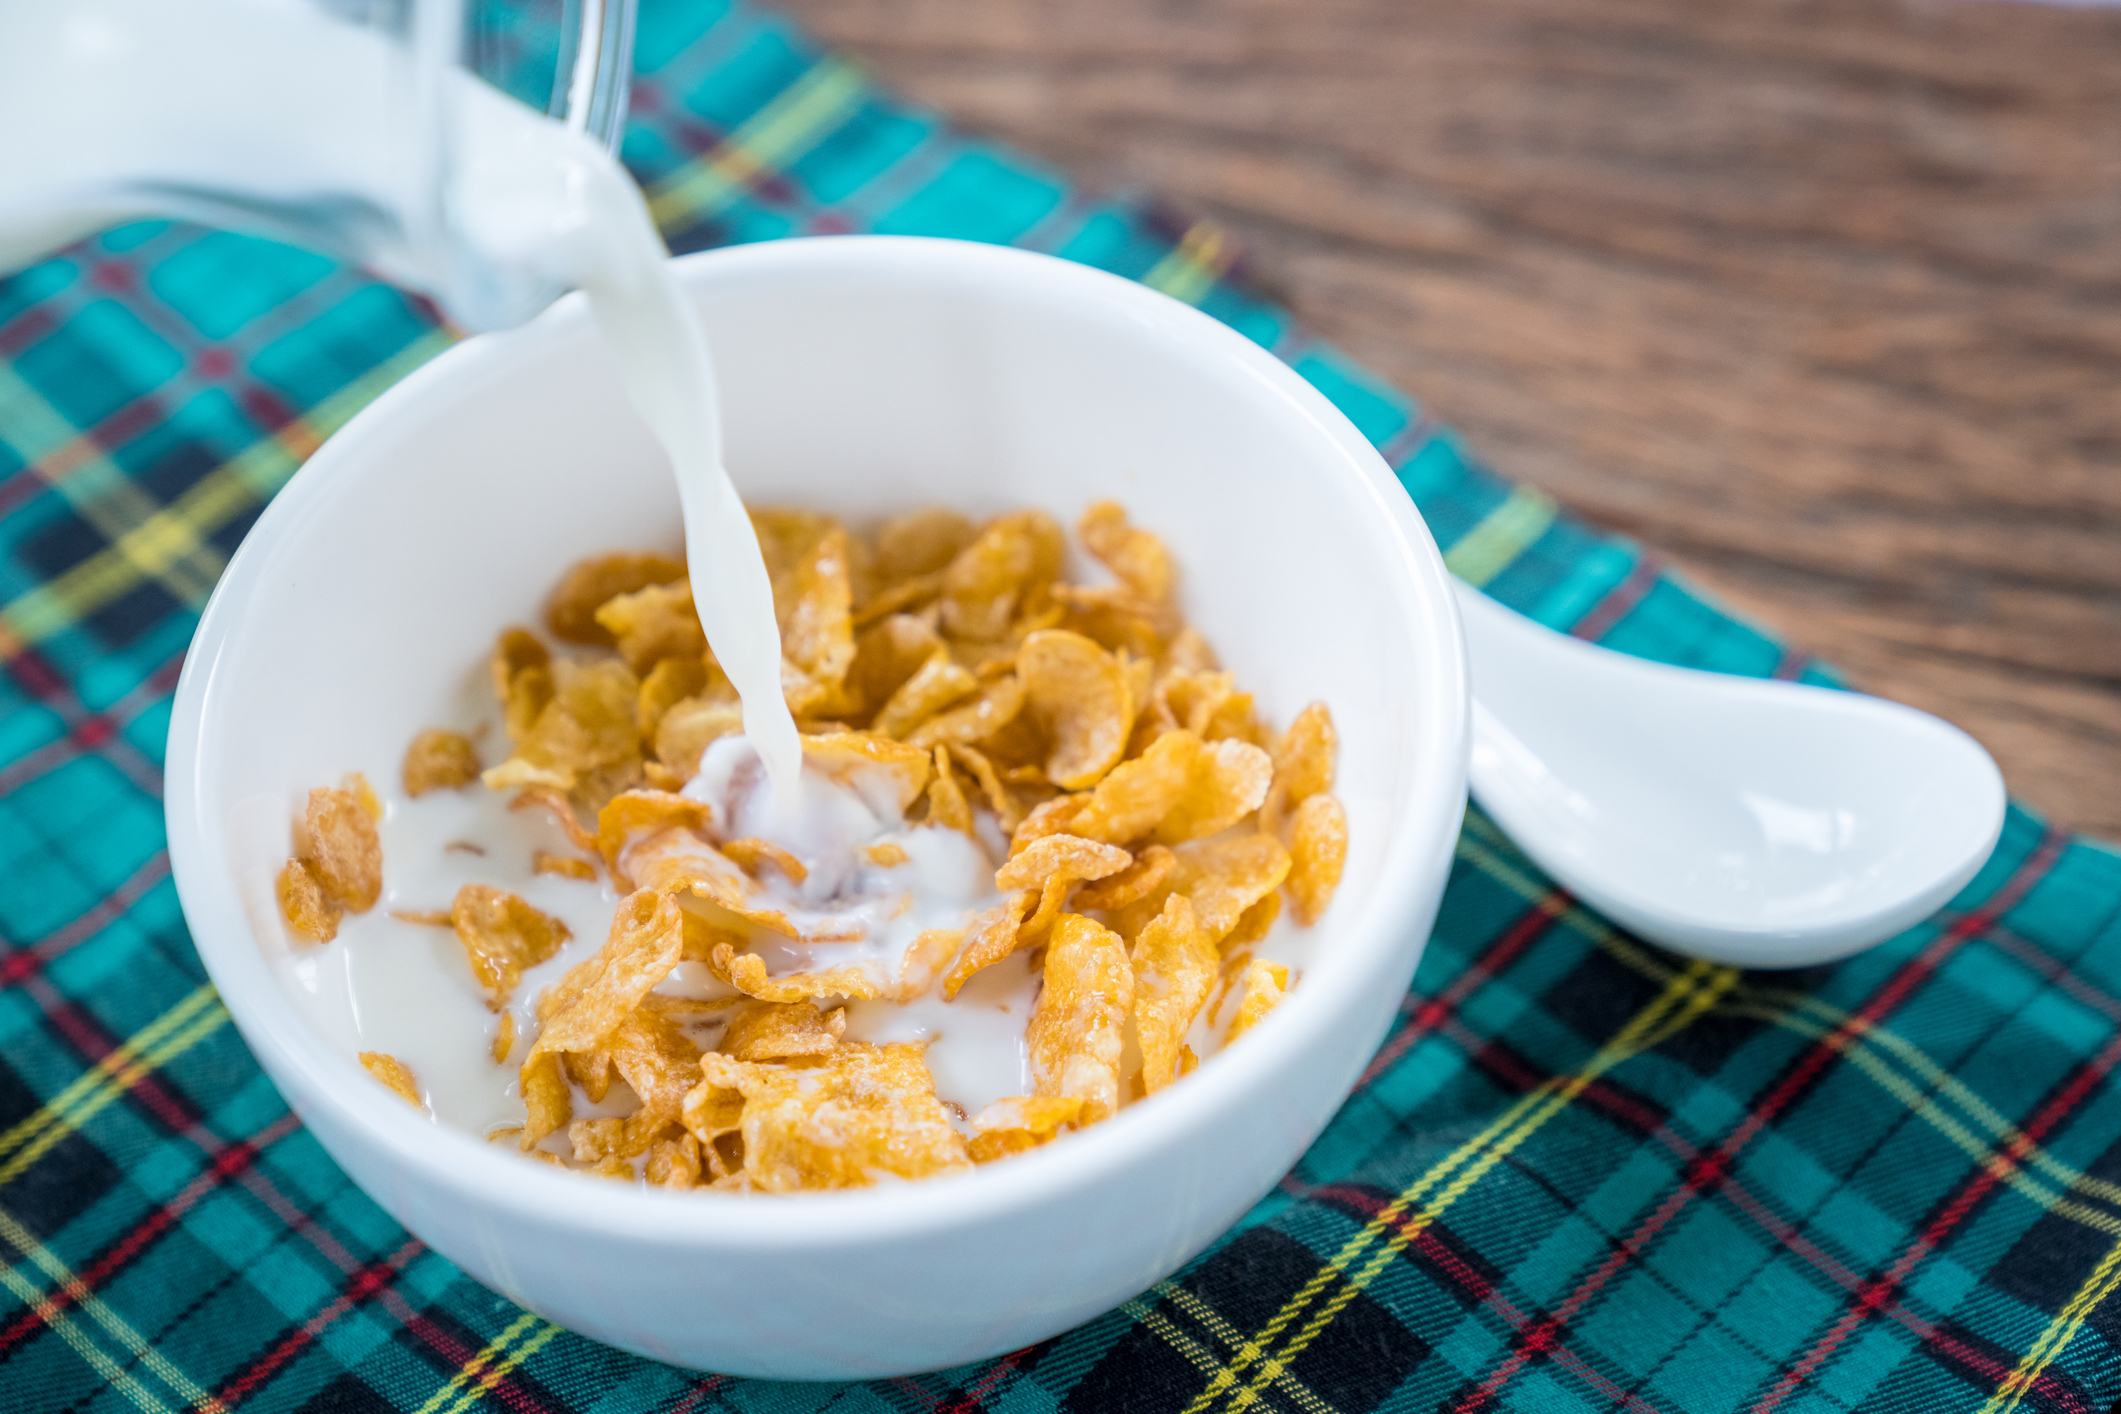 Milk being poured into a bowl of cornflakes on a plaid cloth